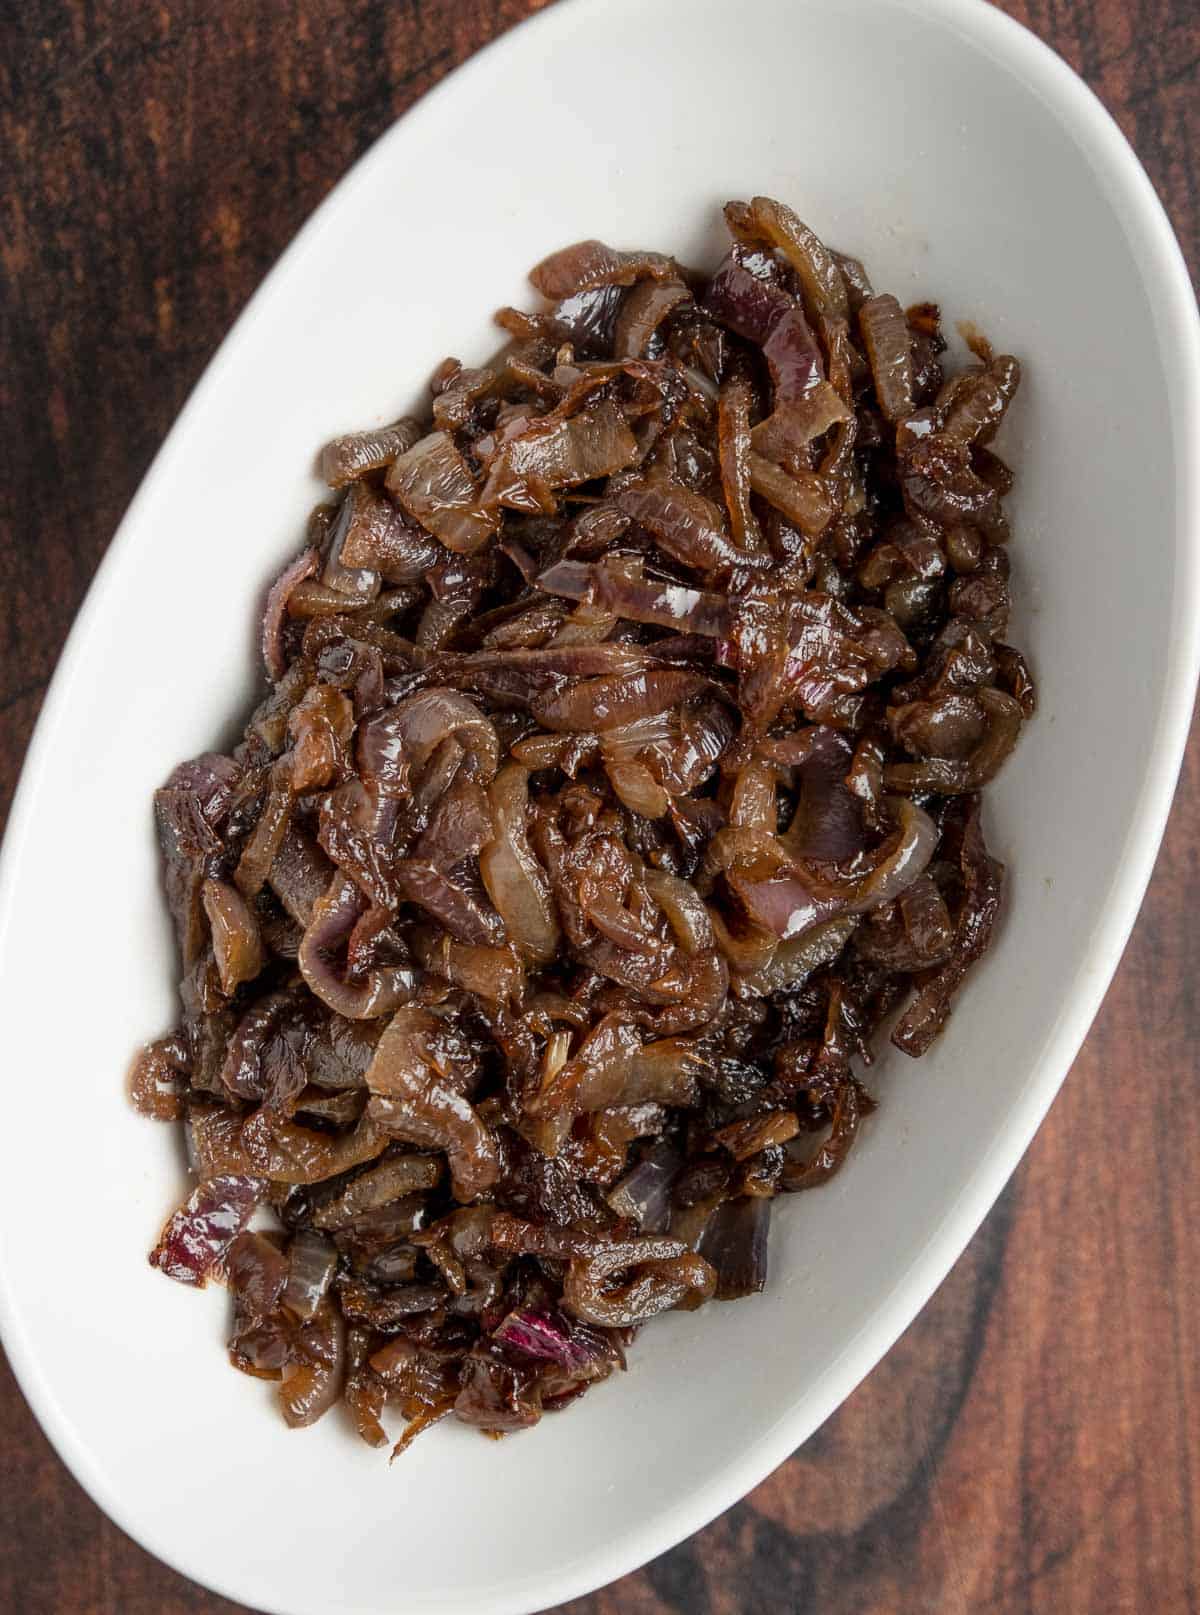 a red caramelized onion in a serving dish